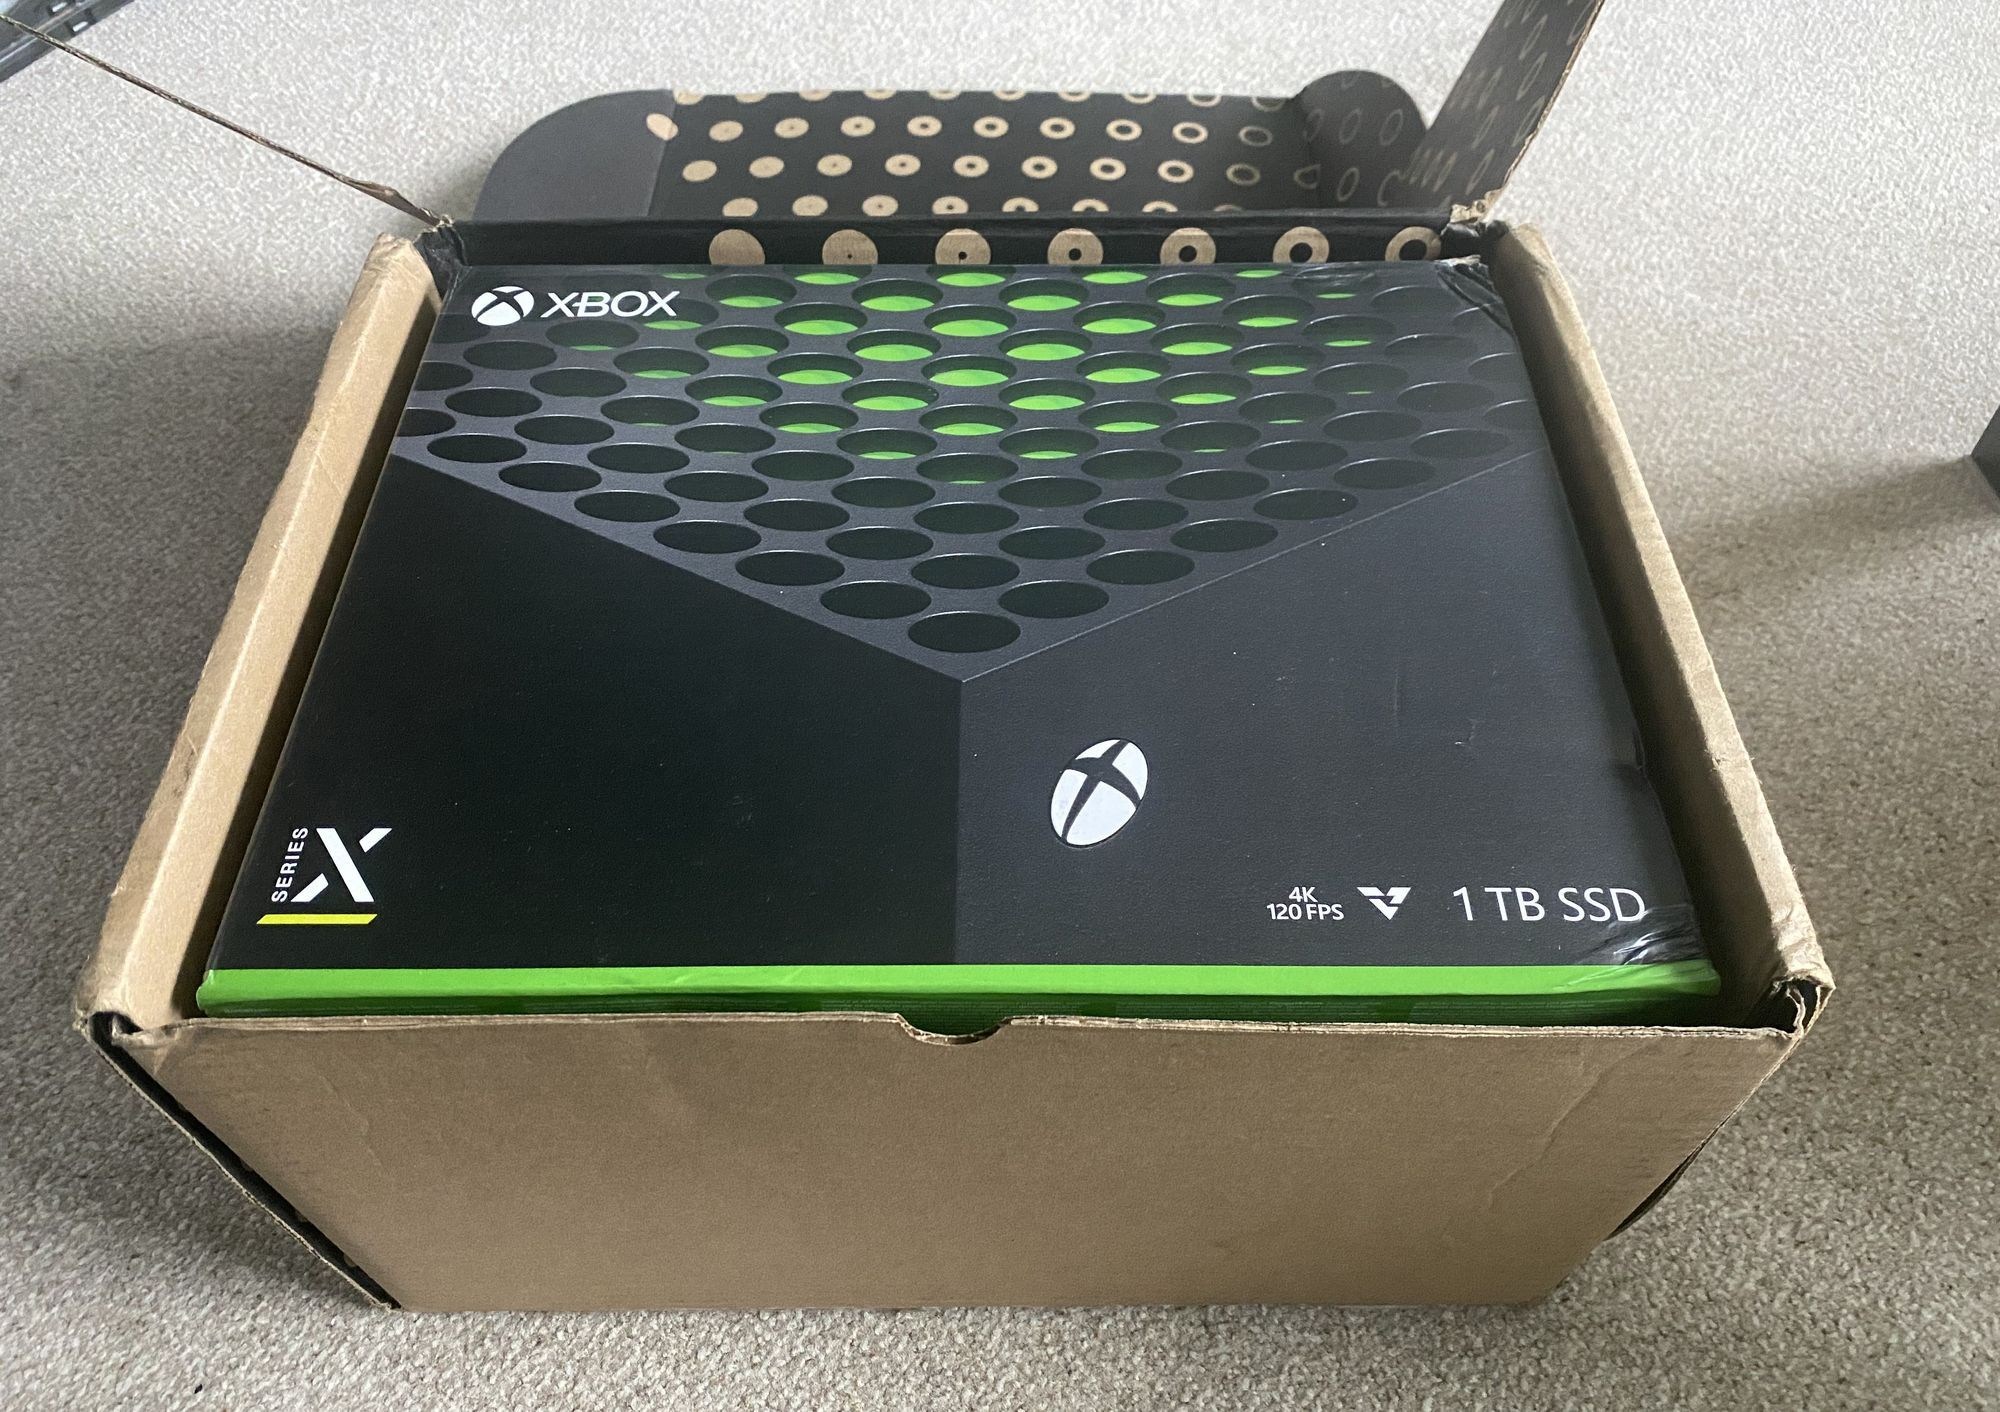 Xbox Series X unboxing – a new generation with one foot in the past